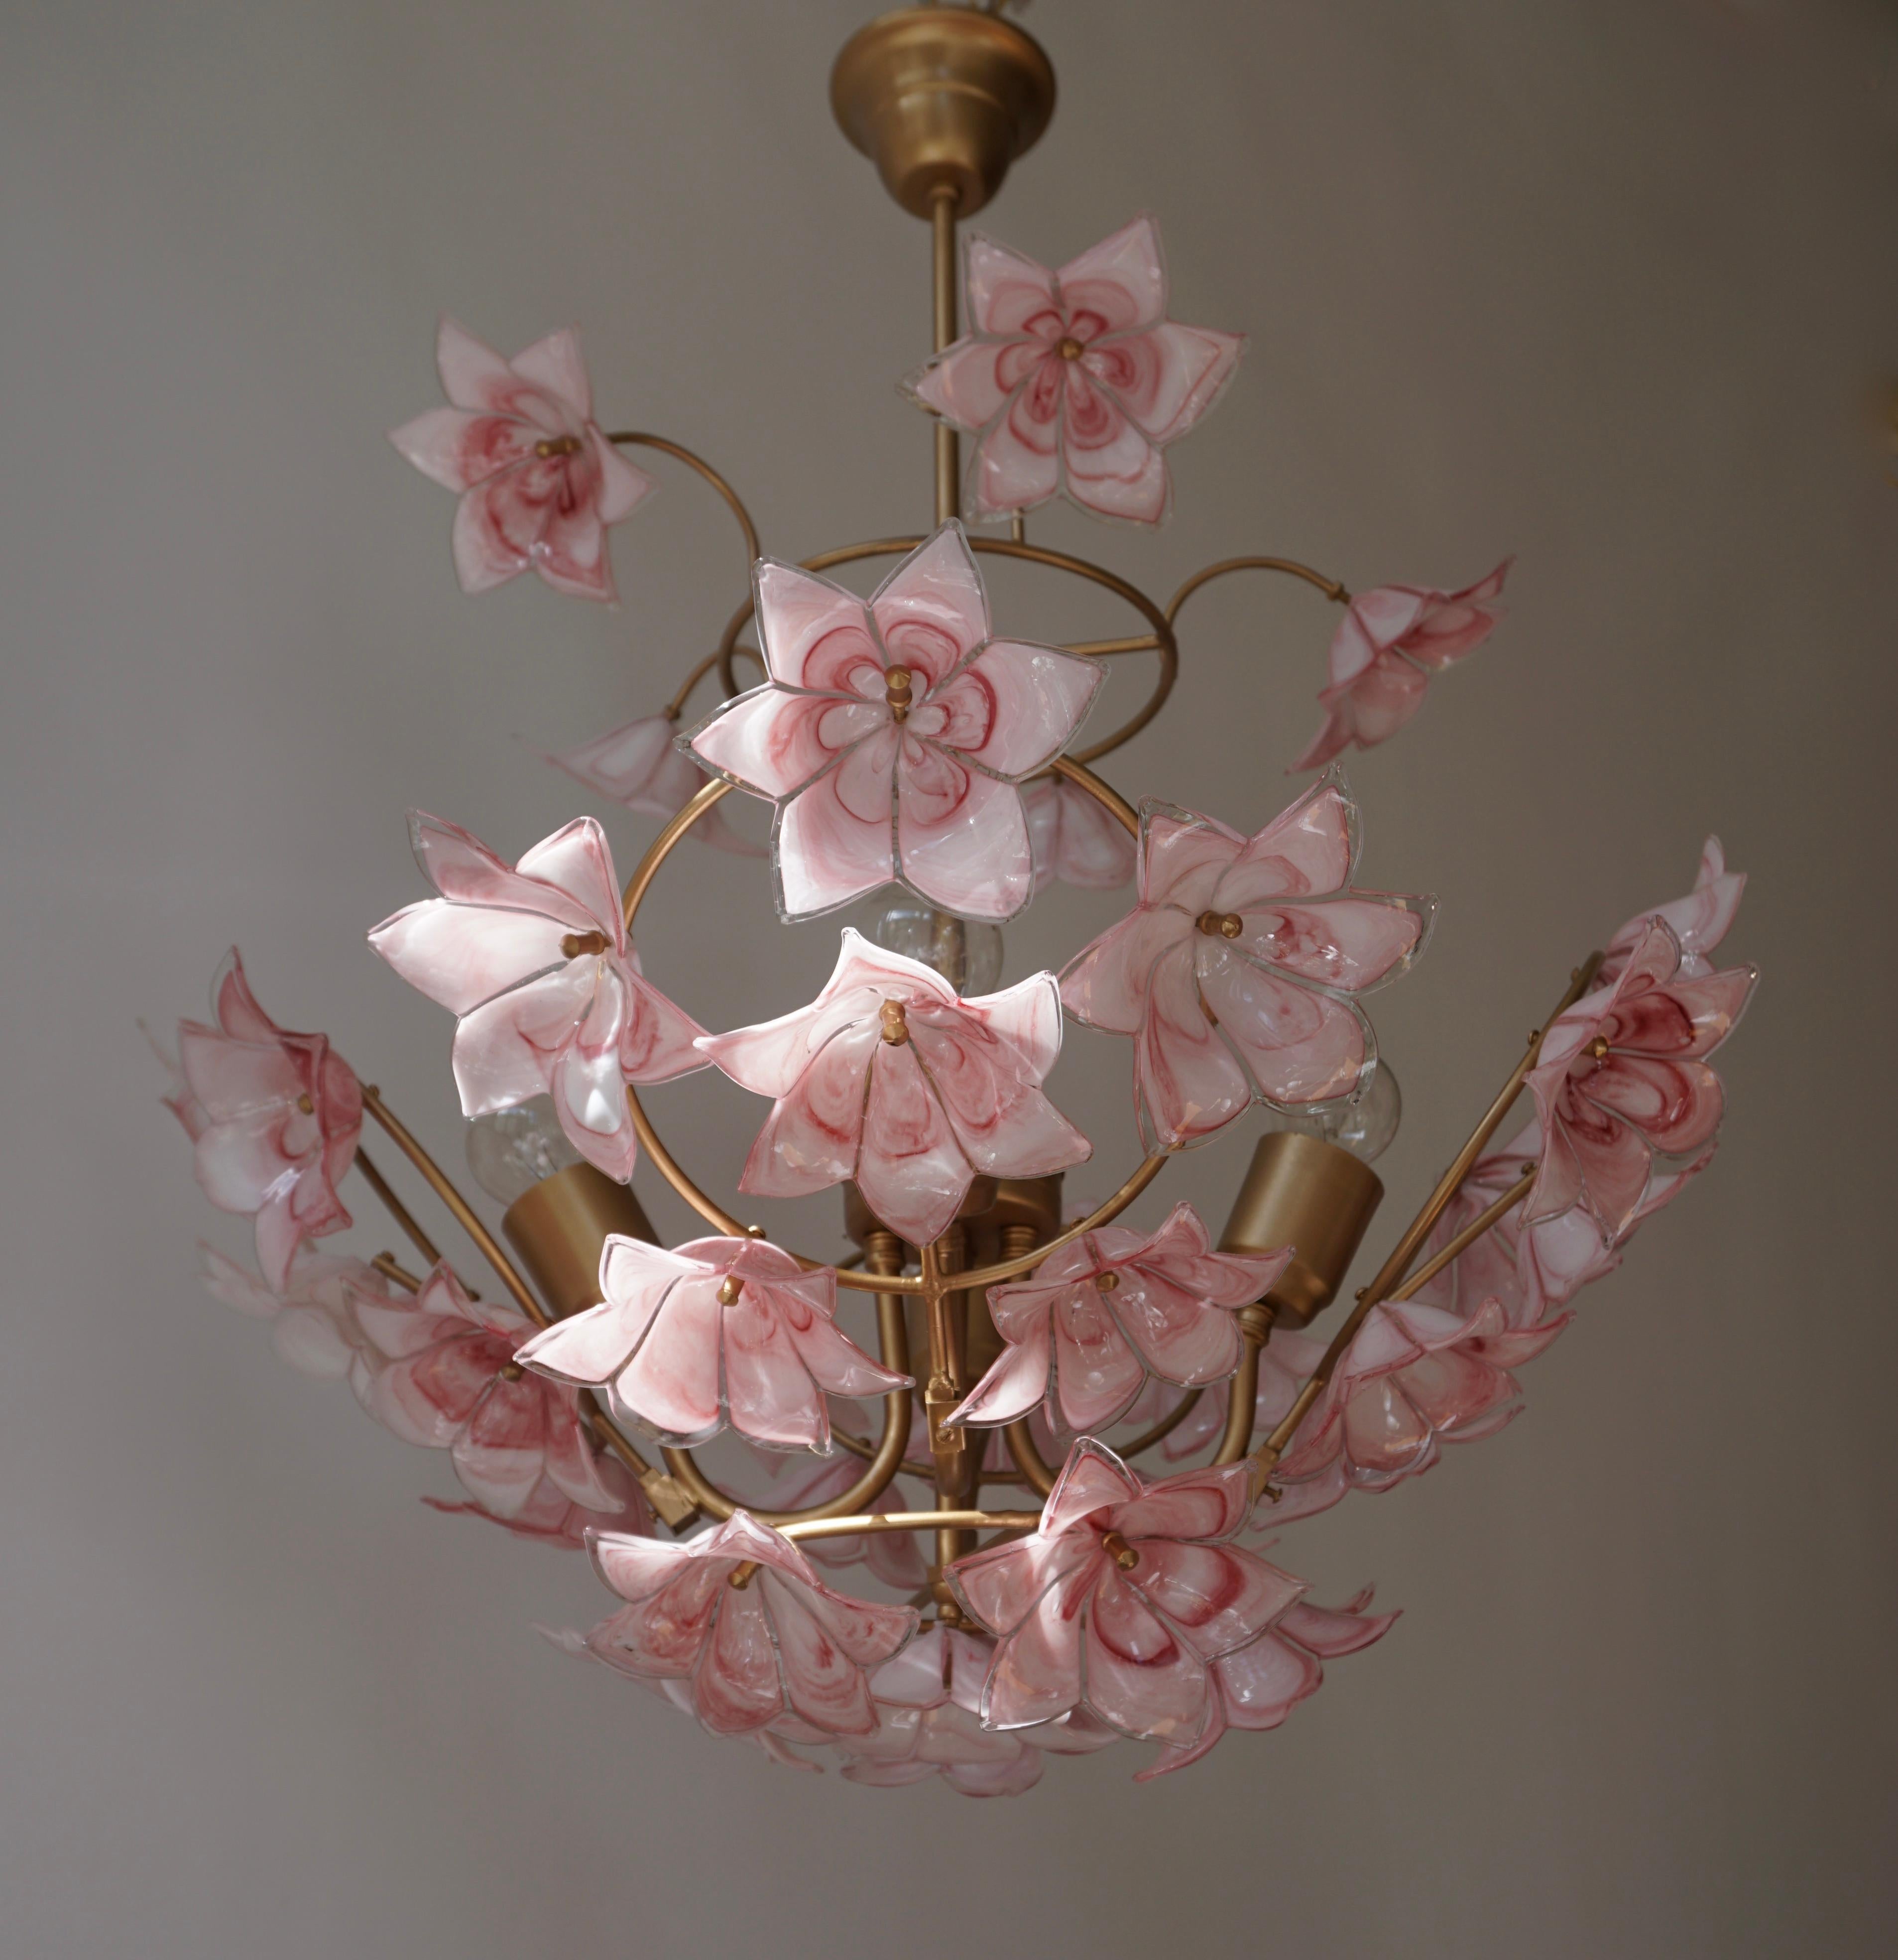 Italian brass chandelier with 35 beautiful pink white Murano glass flowers.
The light requires four single E27 screw fit lightbulbs (60Watt max.) LED compatible.

Measures: Diameter 53 cm.
Height 65 cm.